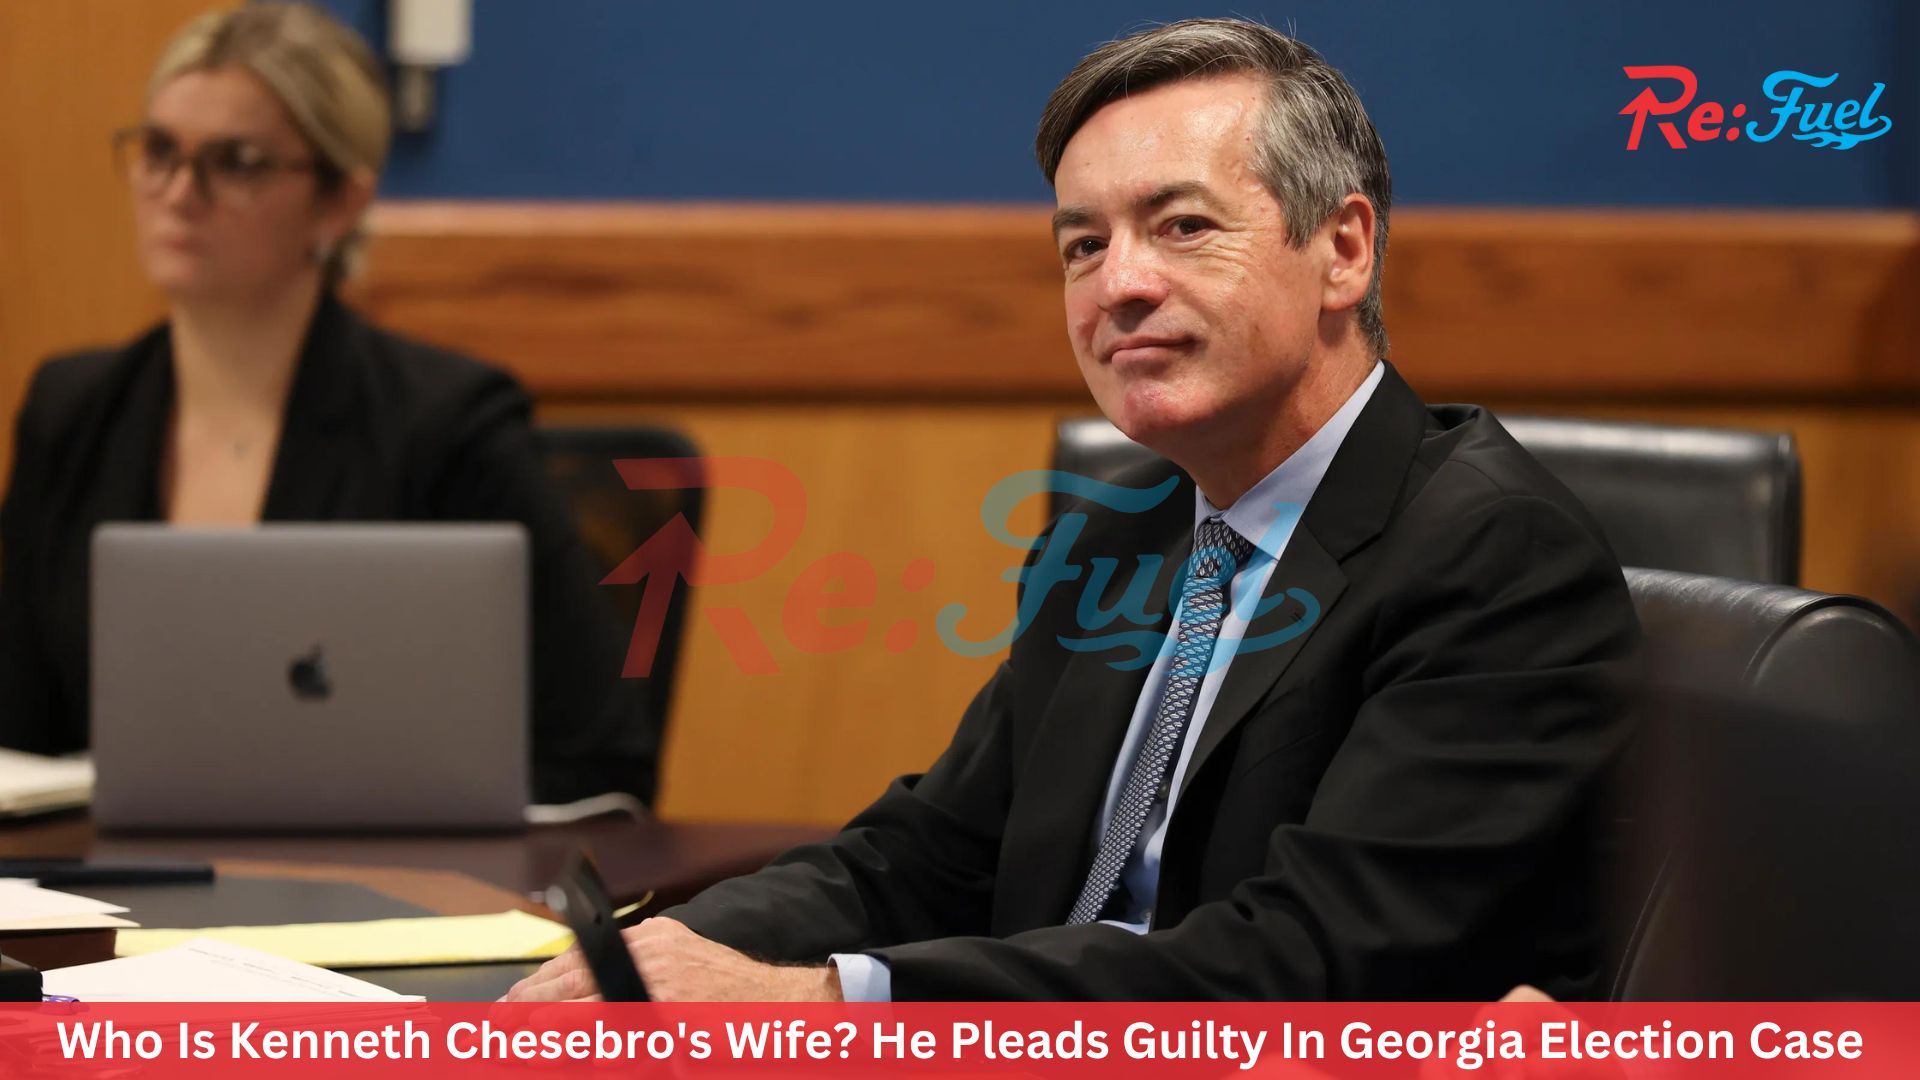 Who Is Kenneth Chesebro's Wife? He Pleads Guilty In Georgia Election Case